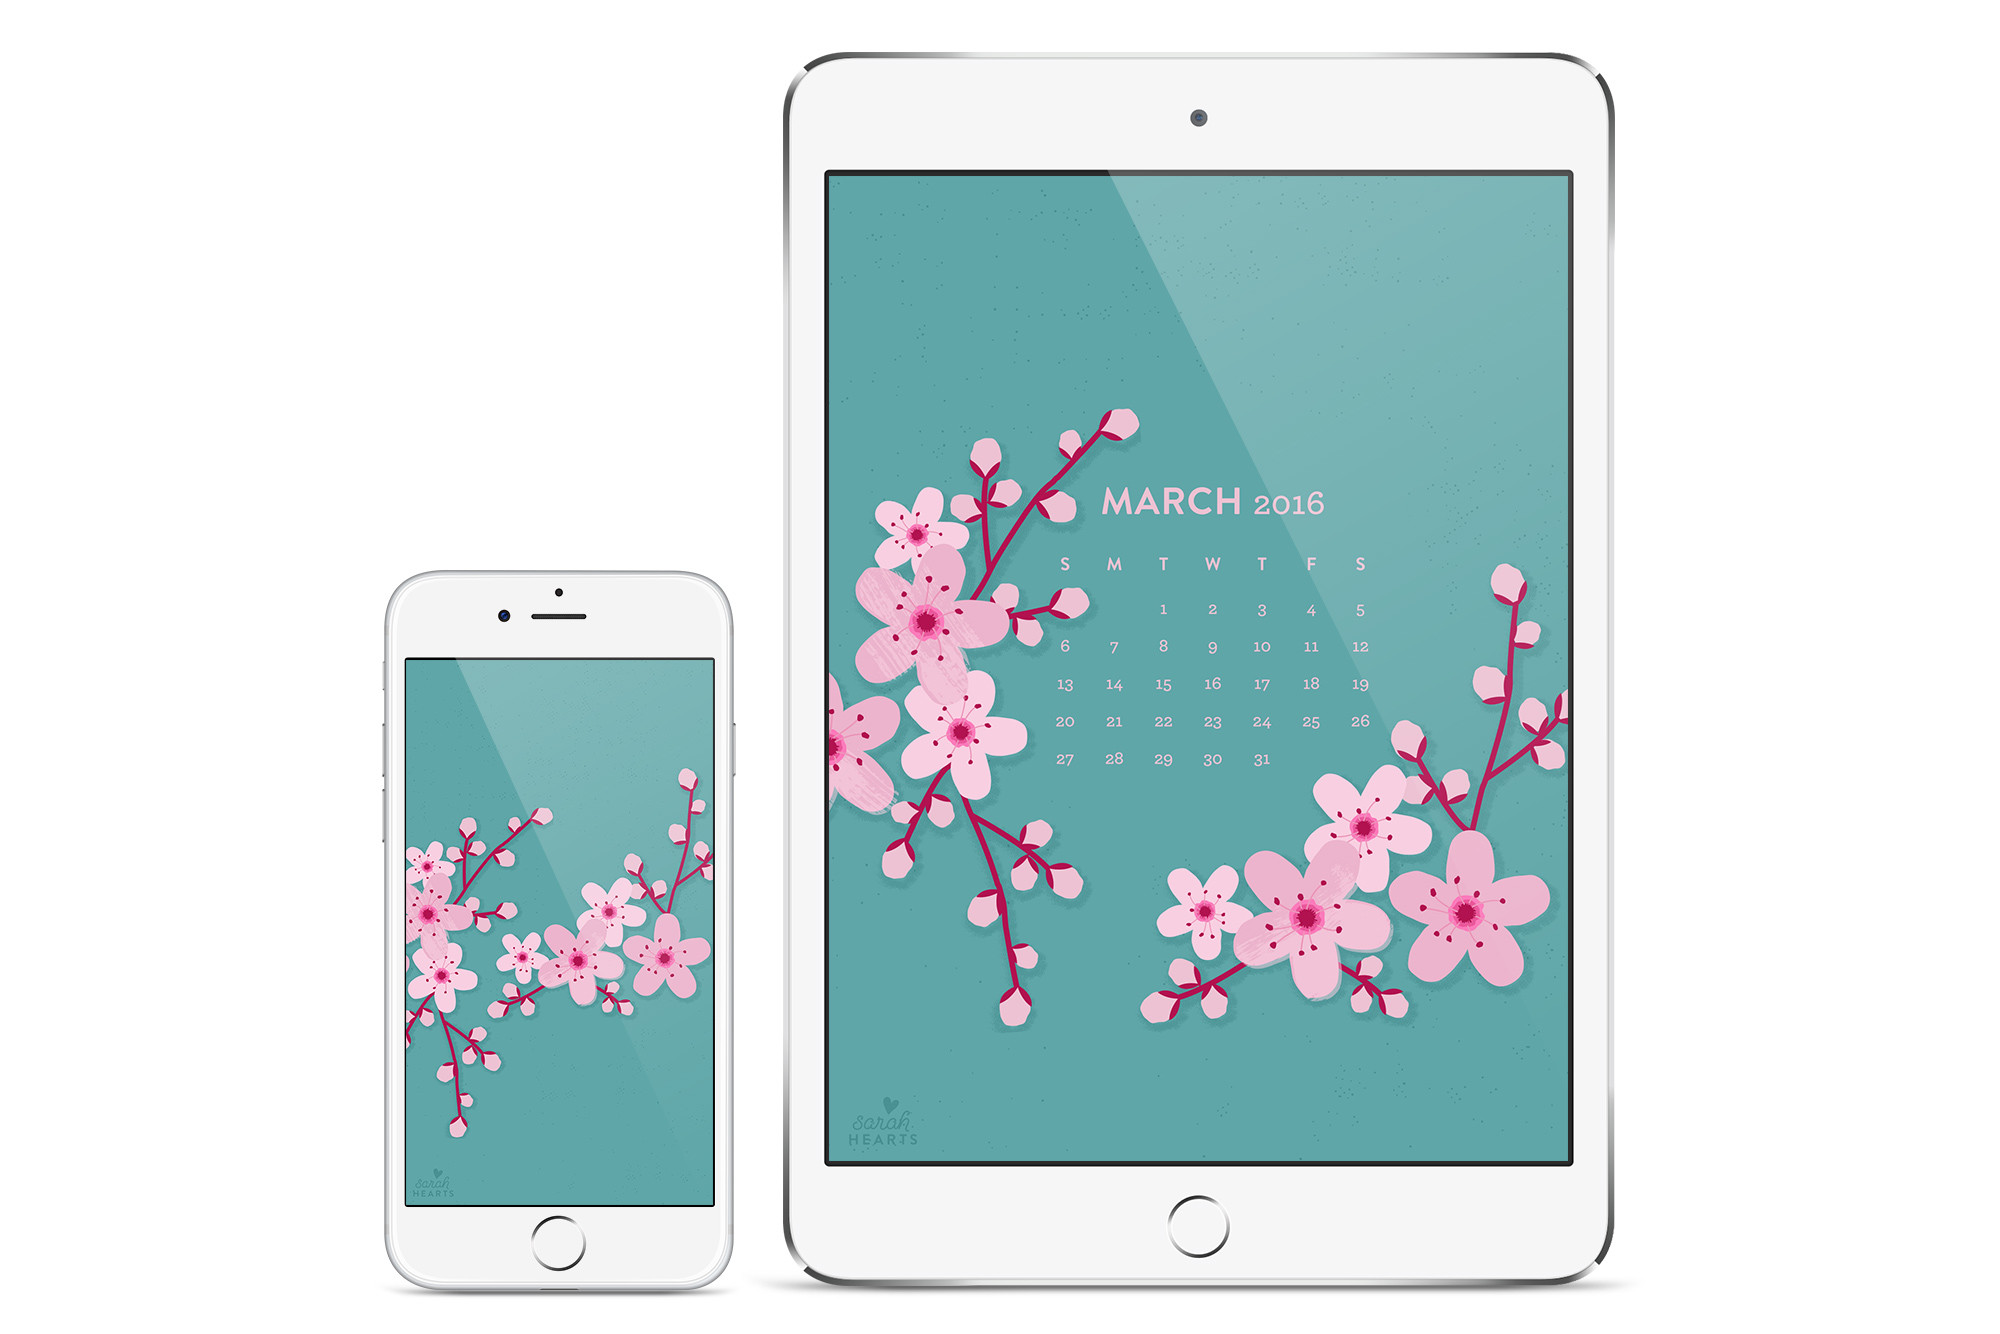 2000x1334 Add some beauty to your computer, phone or tablet with this free cherry  blossom calendar